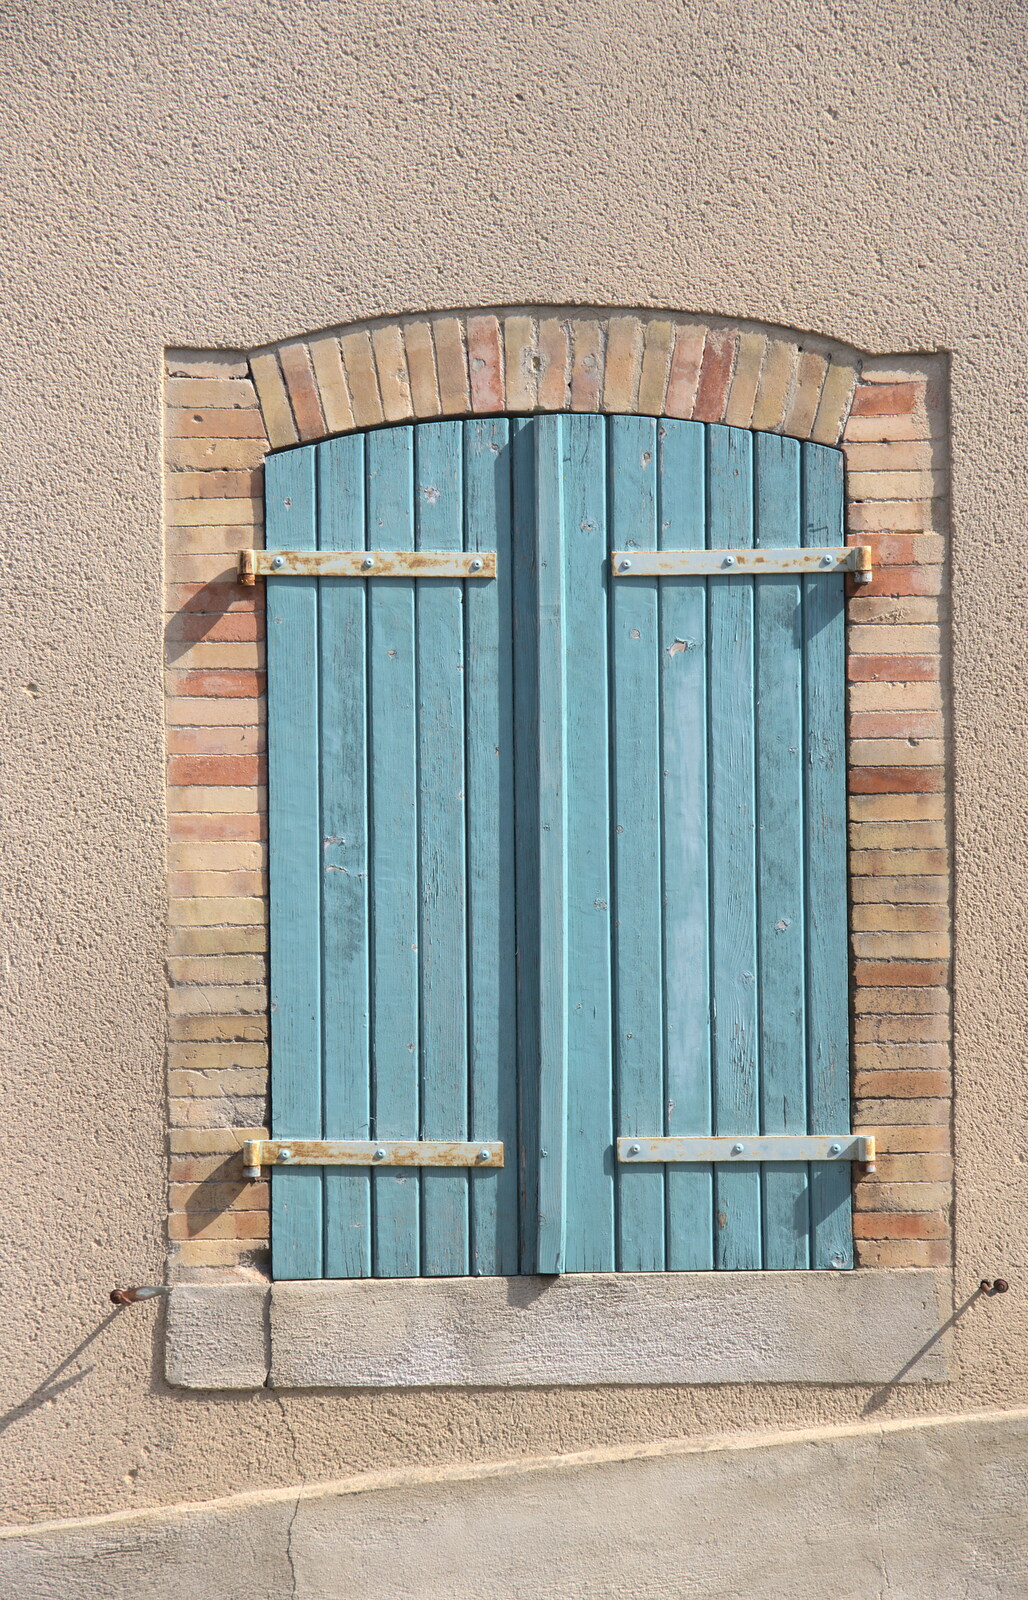 A shuttered window from A Trip to Carcassonne, Aude, France - 8th August 2018